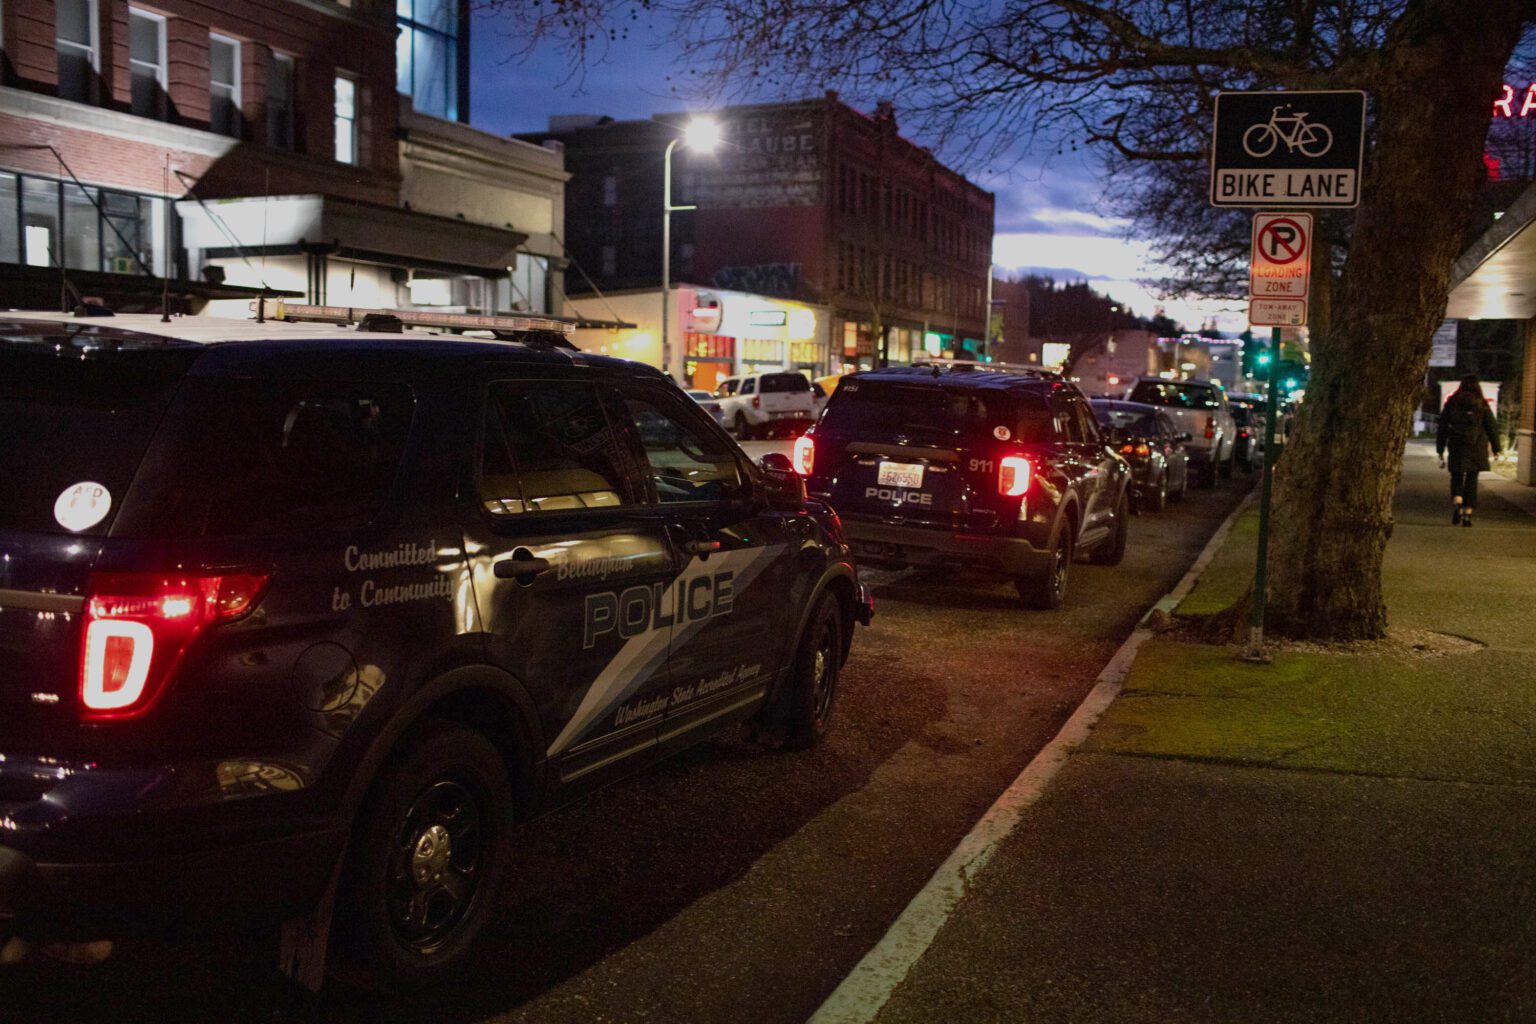 Bellingham Police Department cars are parked along a downtown street in the evening.